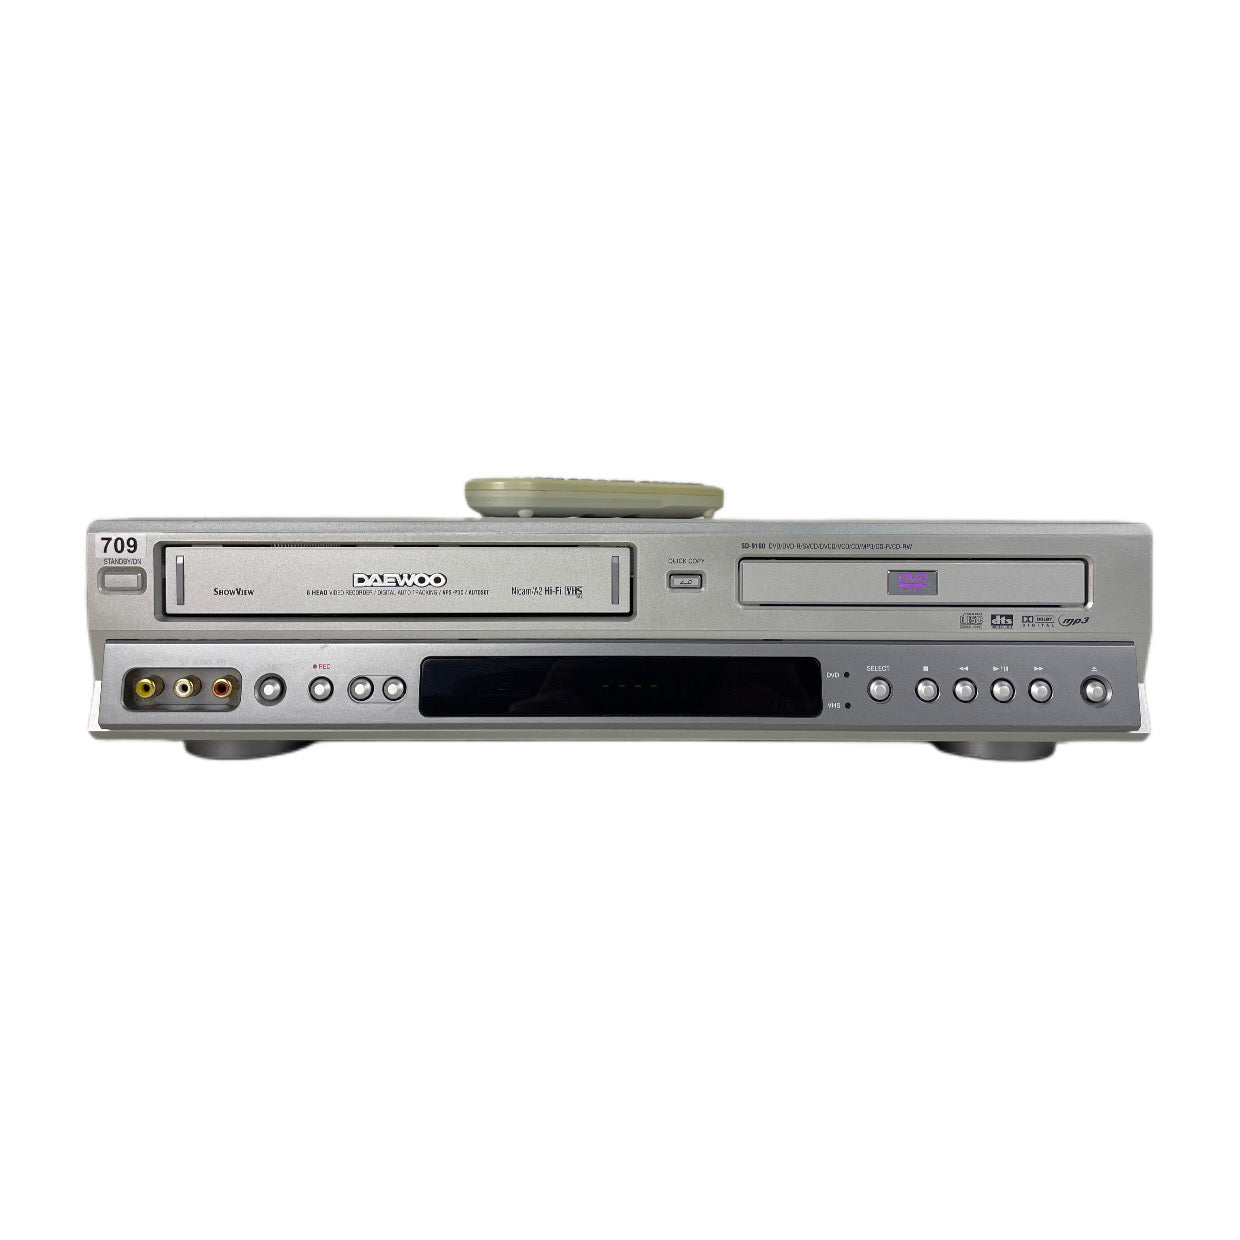 Daewoo sd-9100 dvd player/video cassette recorder | With remote